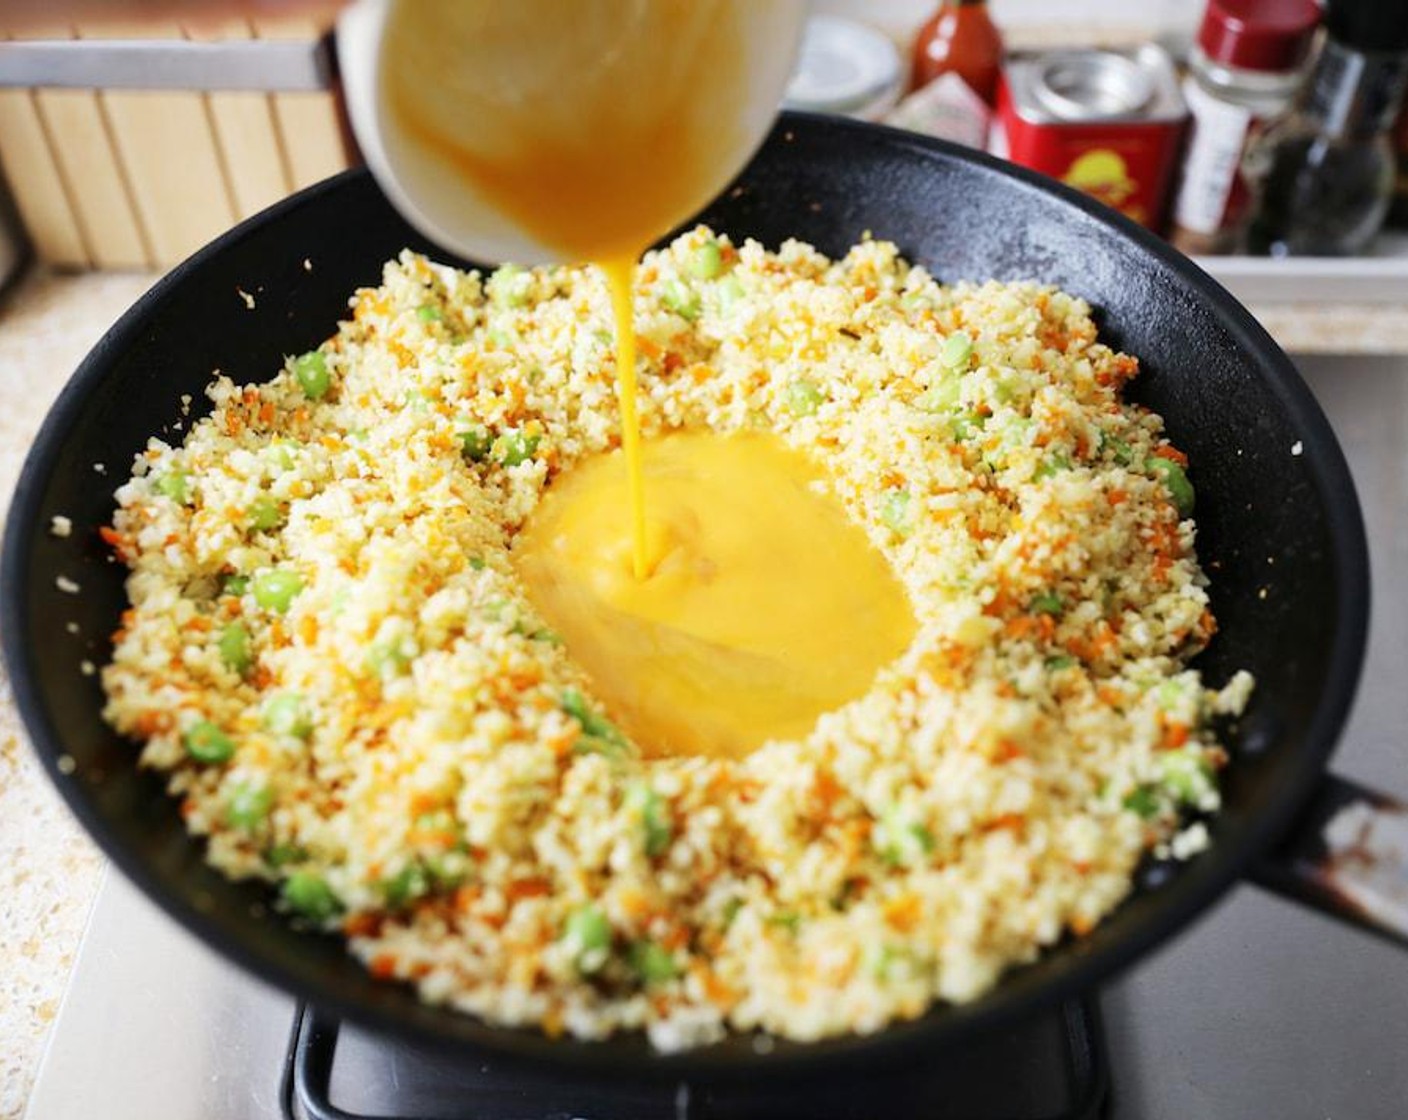 step 5 Make a well in the middle of the wok and add the Egg (1). Stir until the egg is scrambled and then mix into the rest of the cauliflower rice.